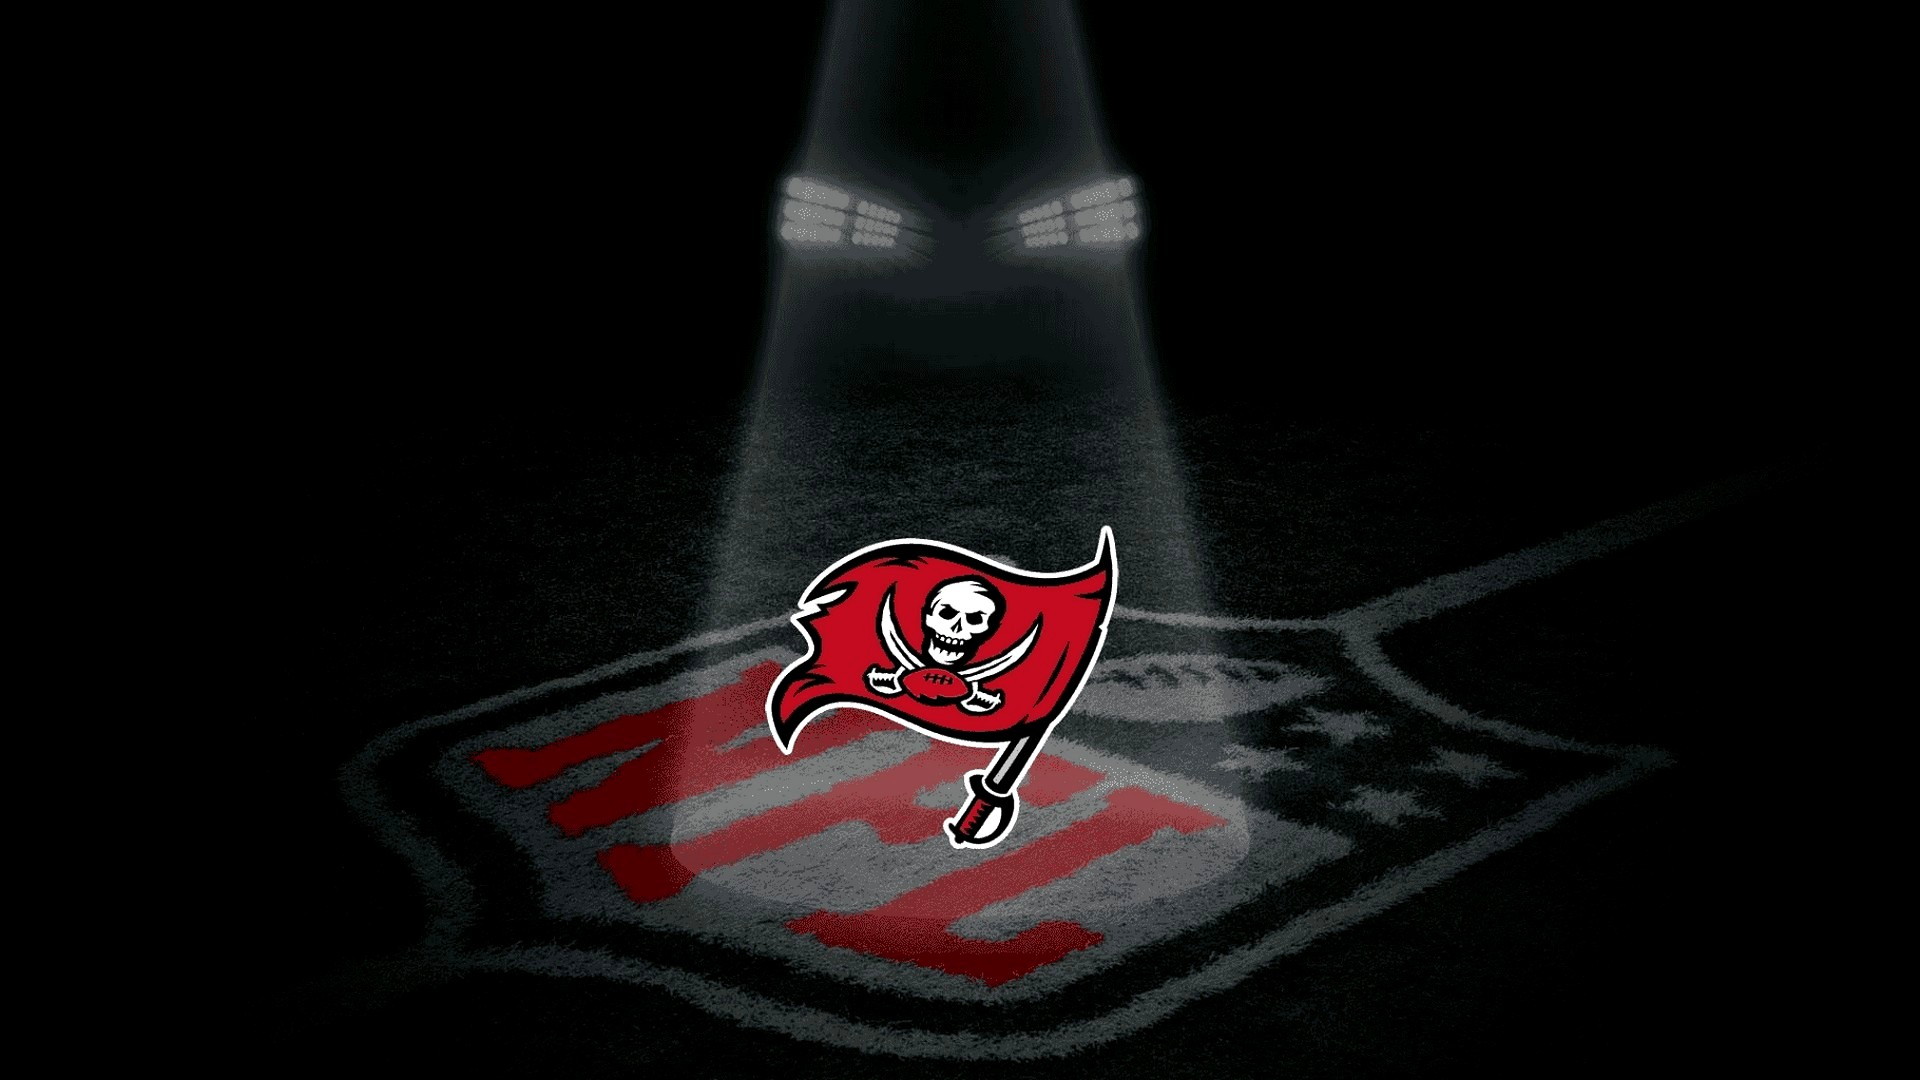 Tampa Bay Buccaneers Wallpaper For Desktop with high-resolution 1920x1080 pixel. You can use and set as wallpaper for Notebook Screensavers, Mac Wallpapers, Mobile Home Screen, iPhone or Android Phones Lock Screen